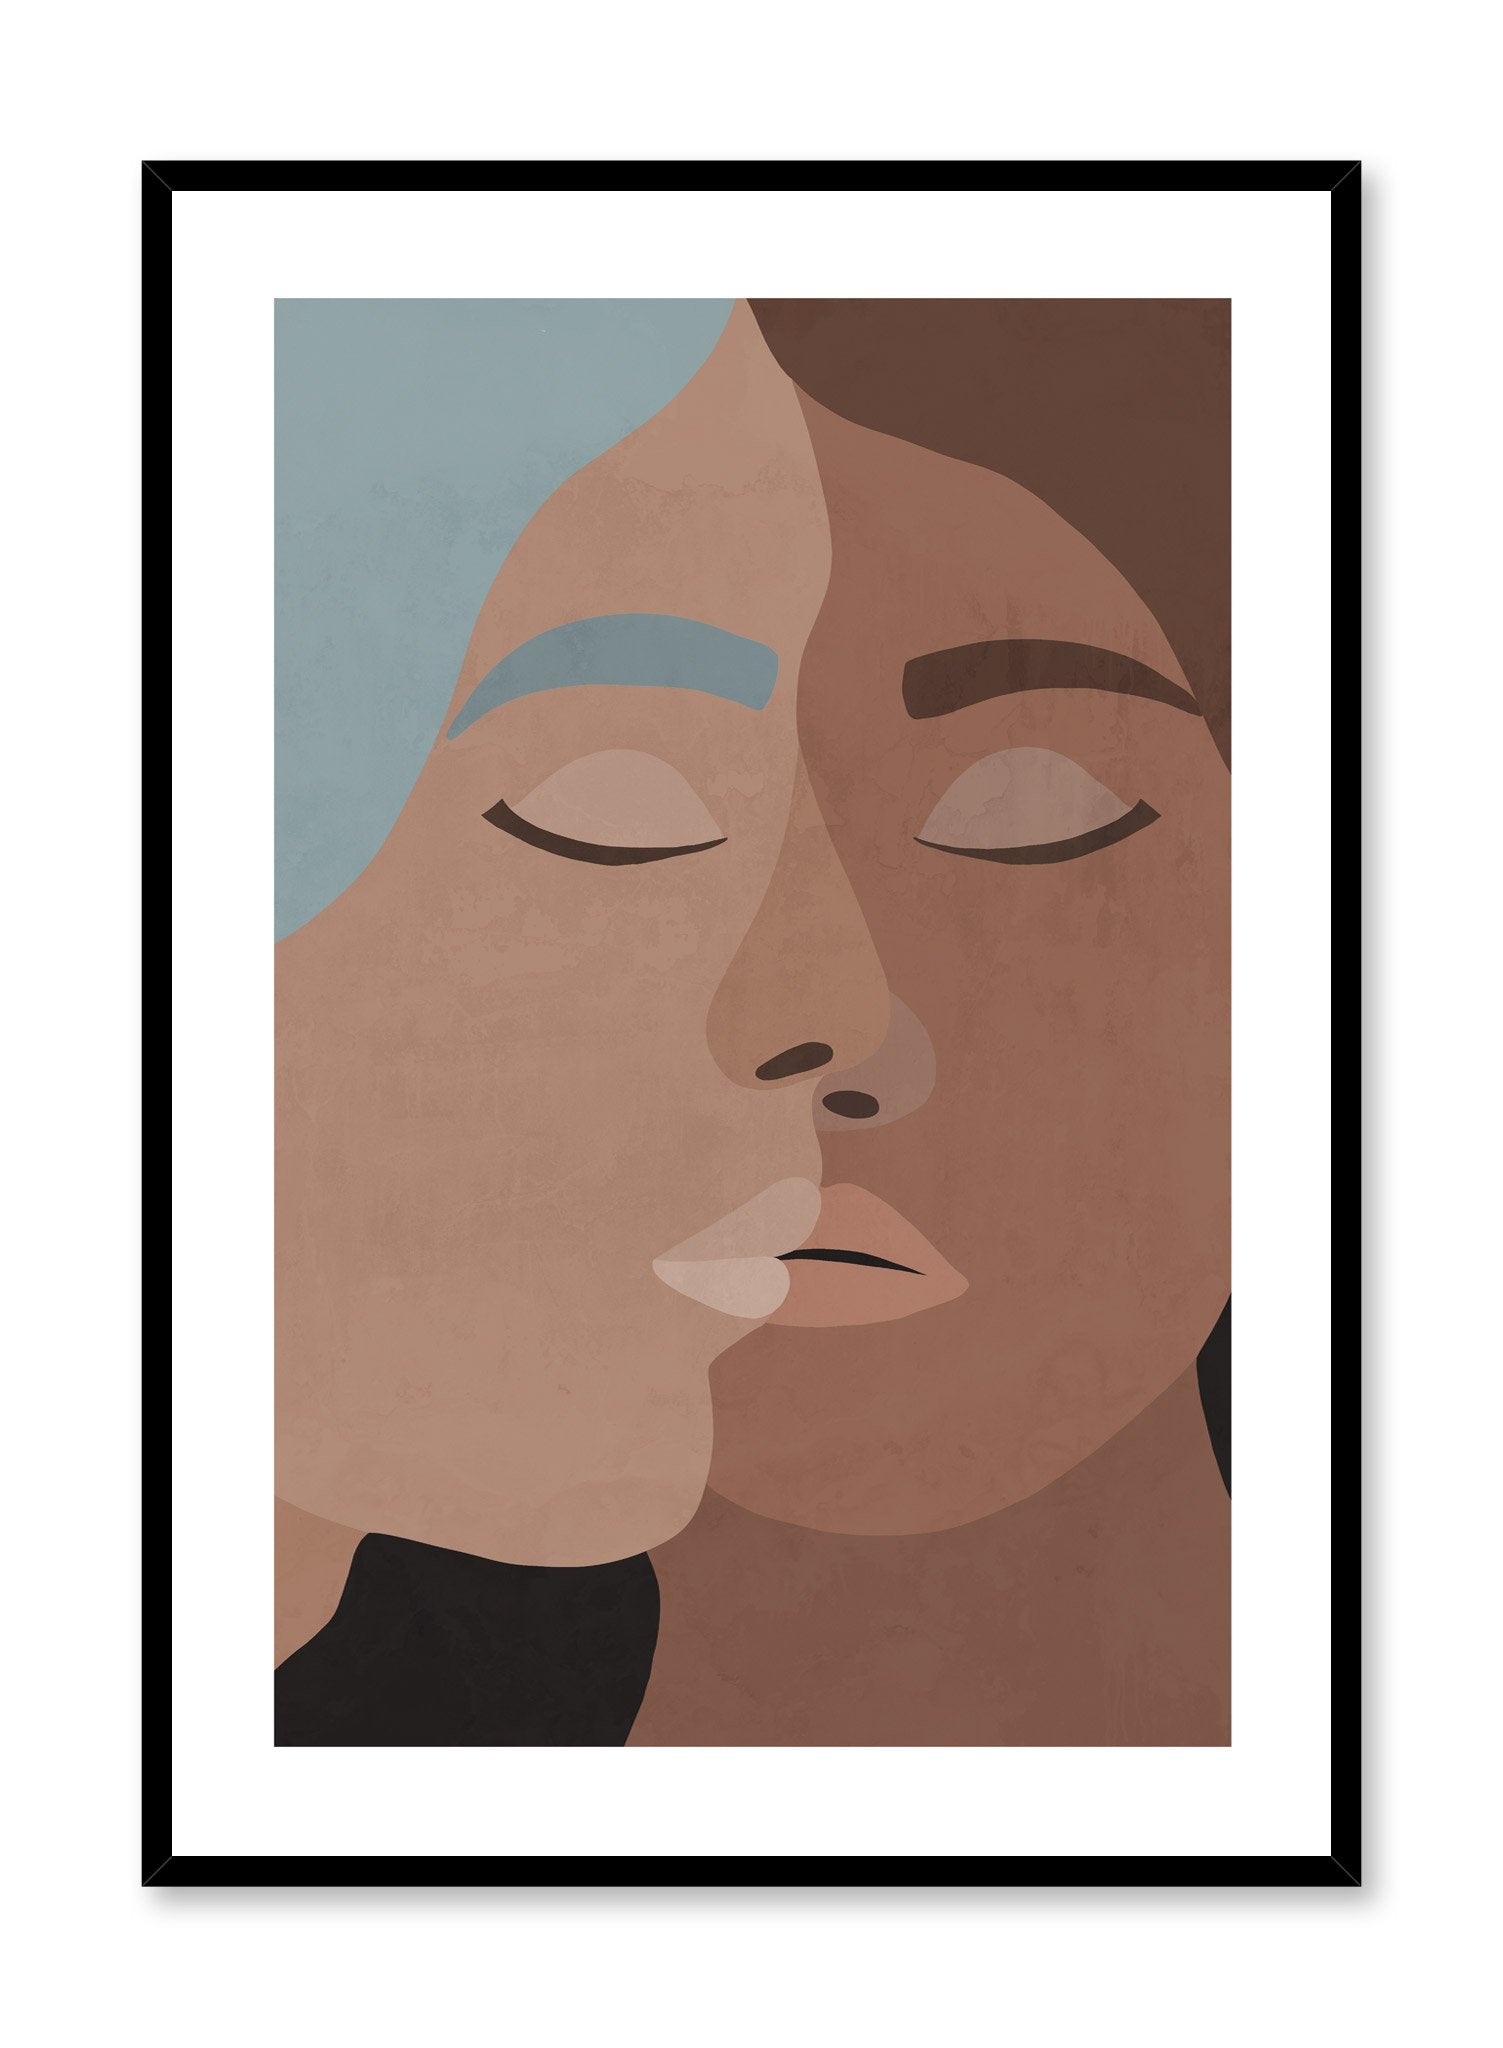 "Crossing Paths" is a romantic and minimalist blue, brown and beige illustration poster by Opposite Wall of two women kissing romantically.